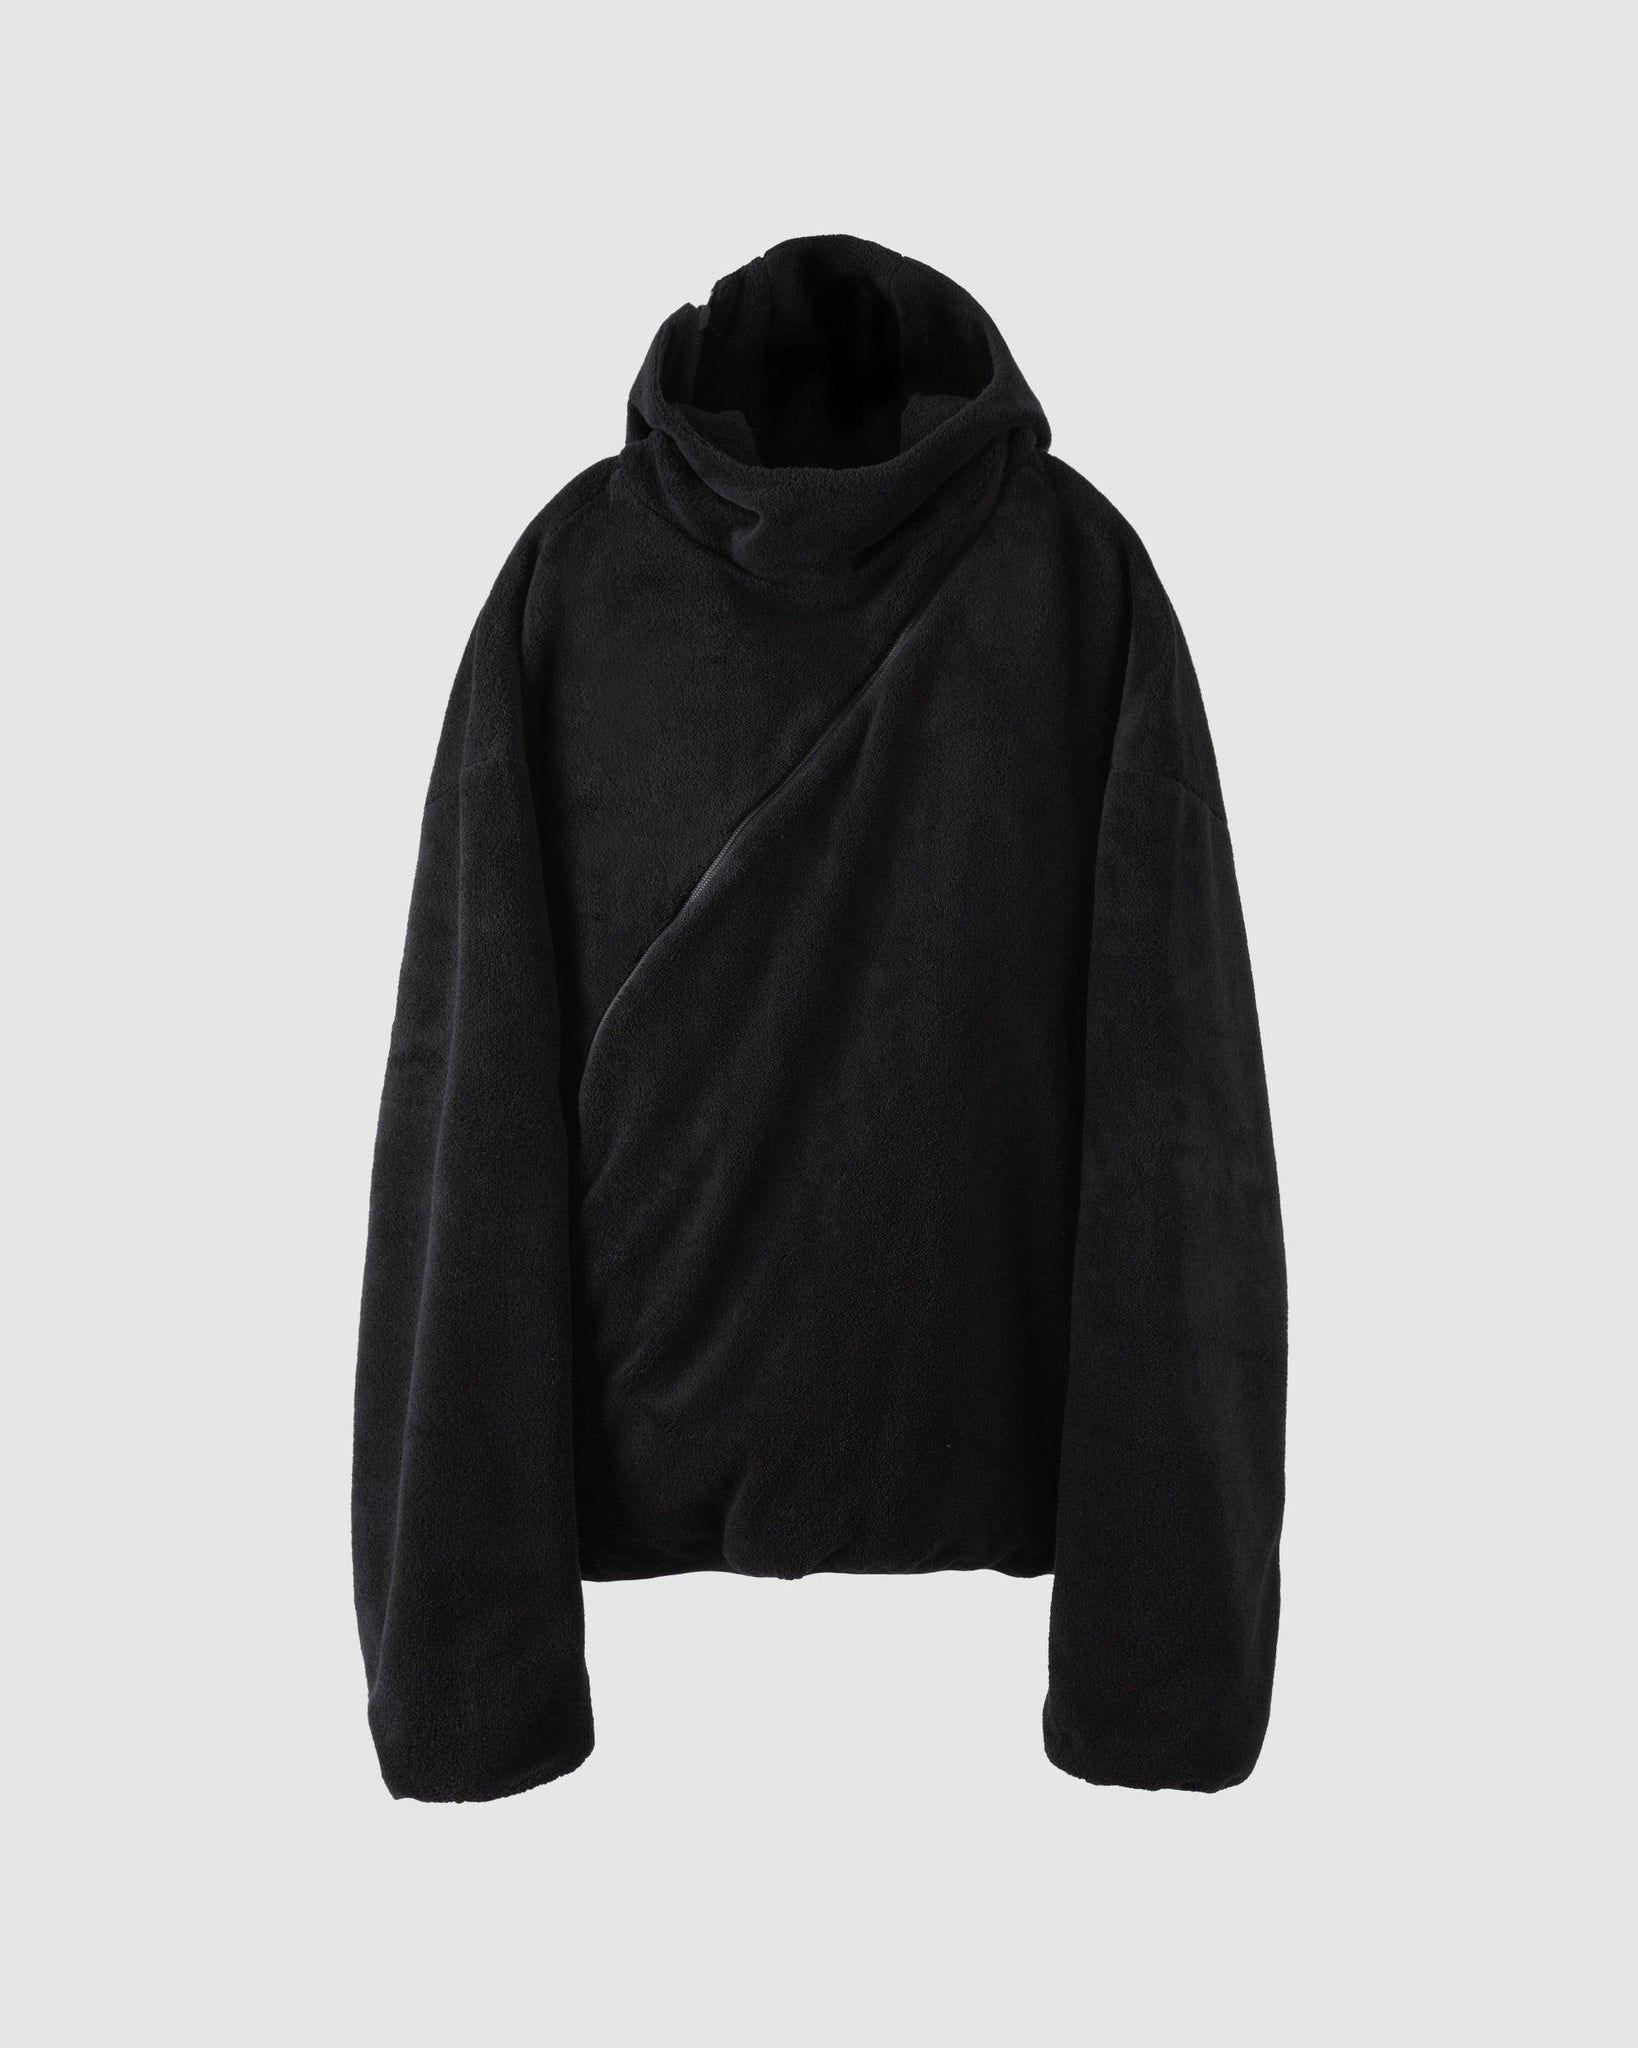 5.1 Hoodie Center Black - {{ collection.title }} - Chinatown Country Club 